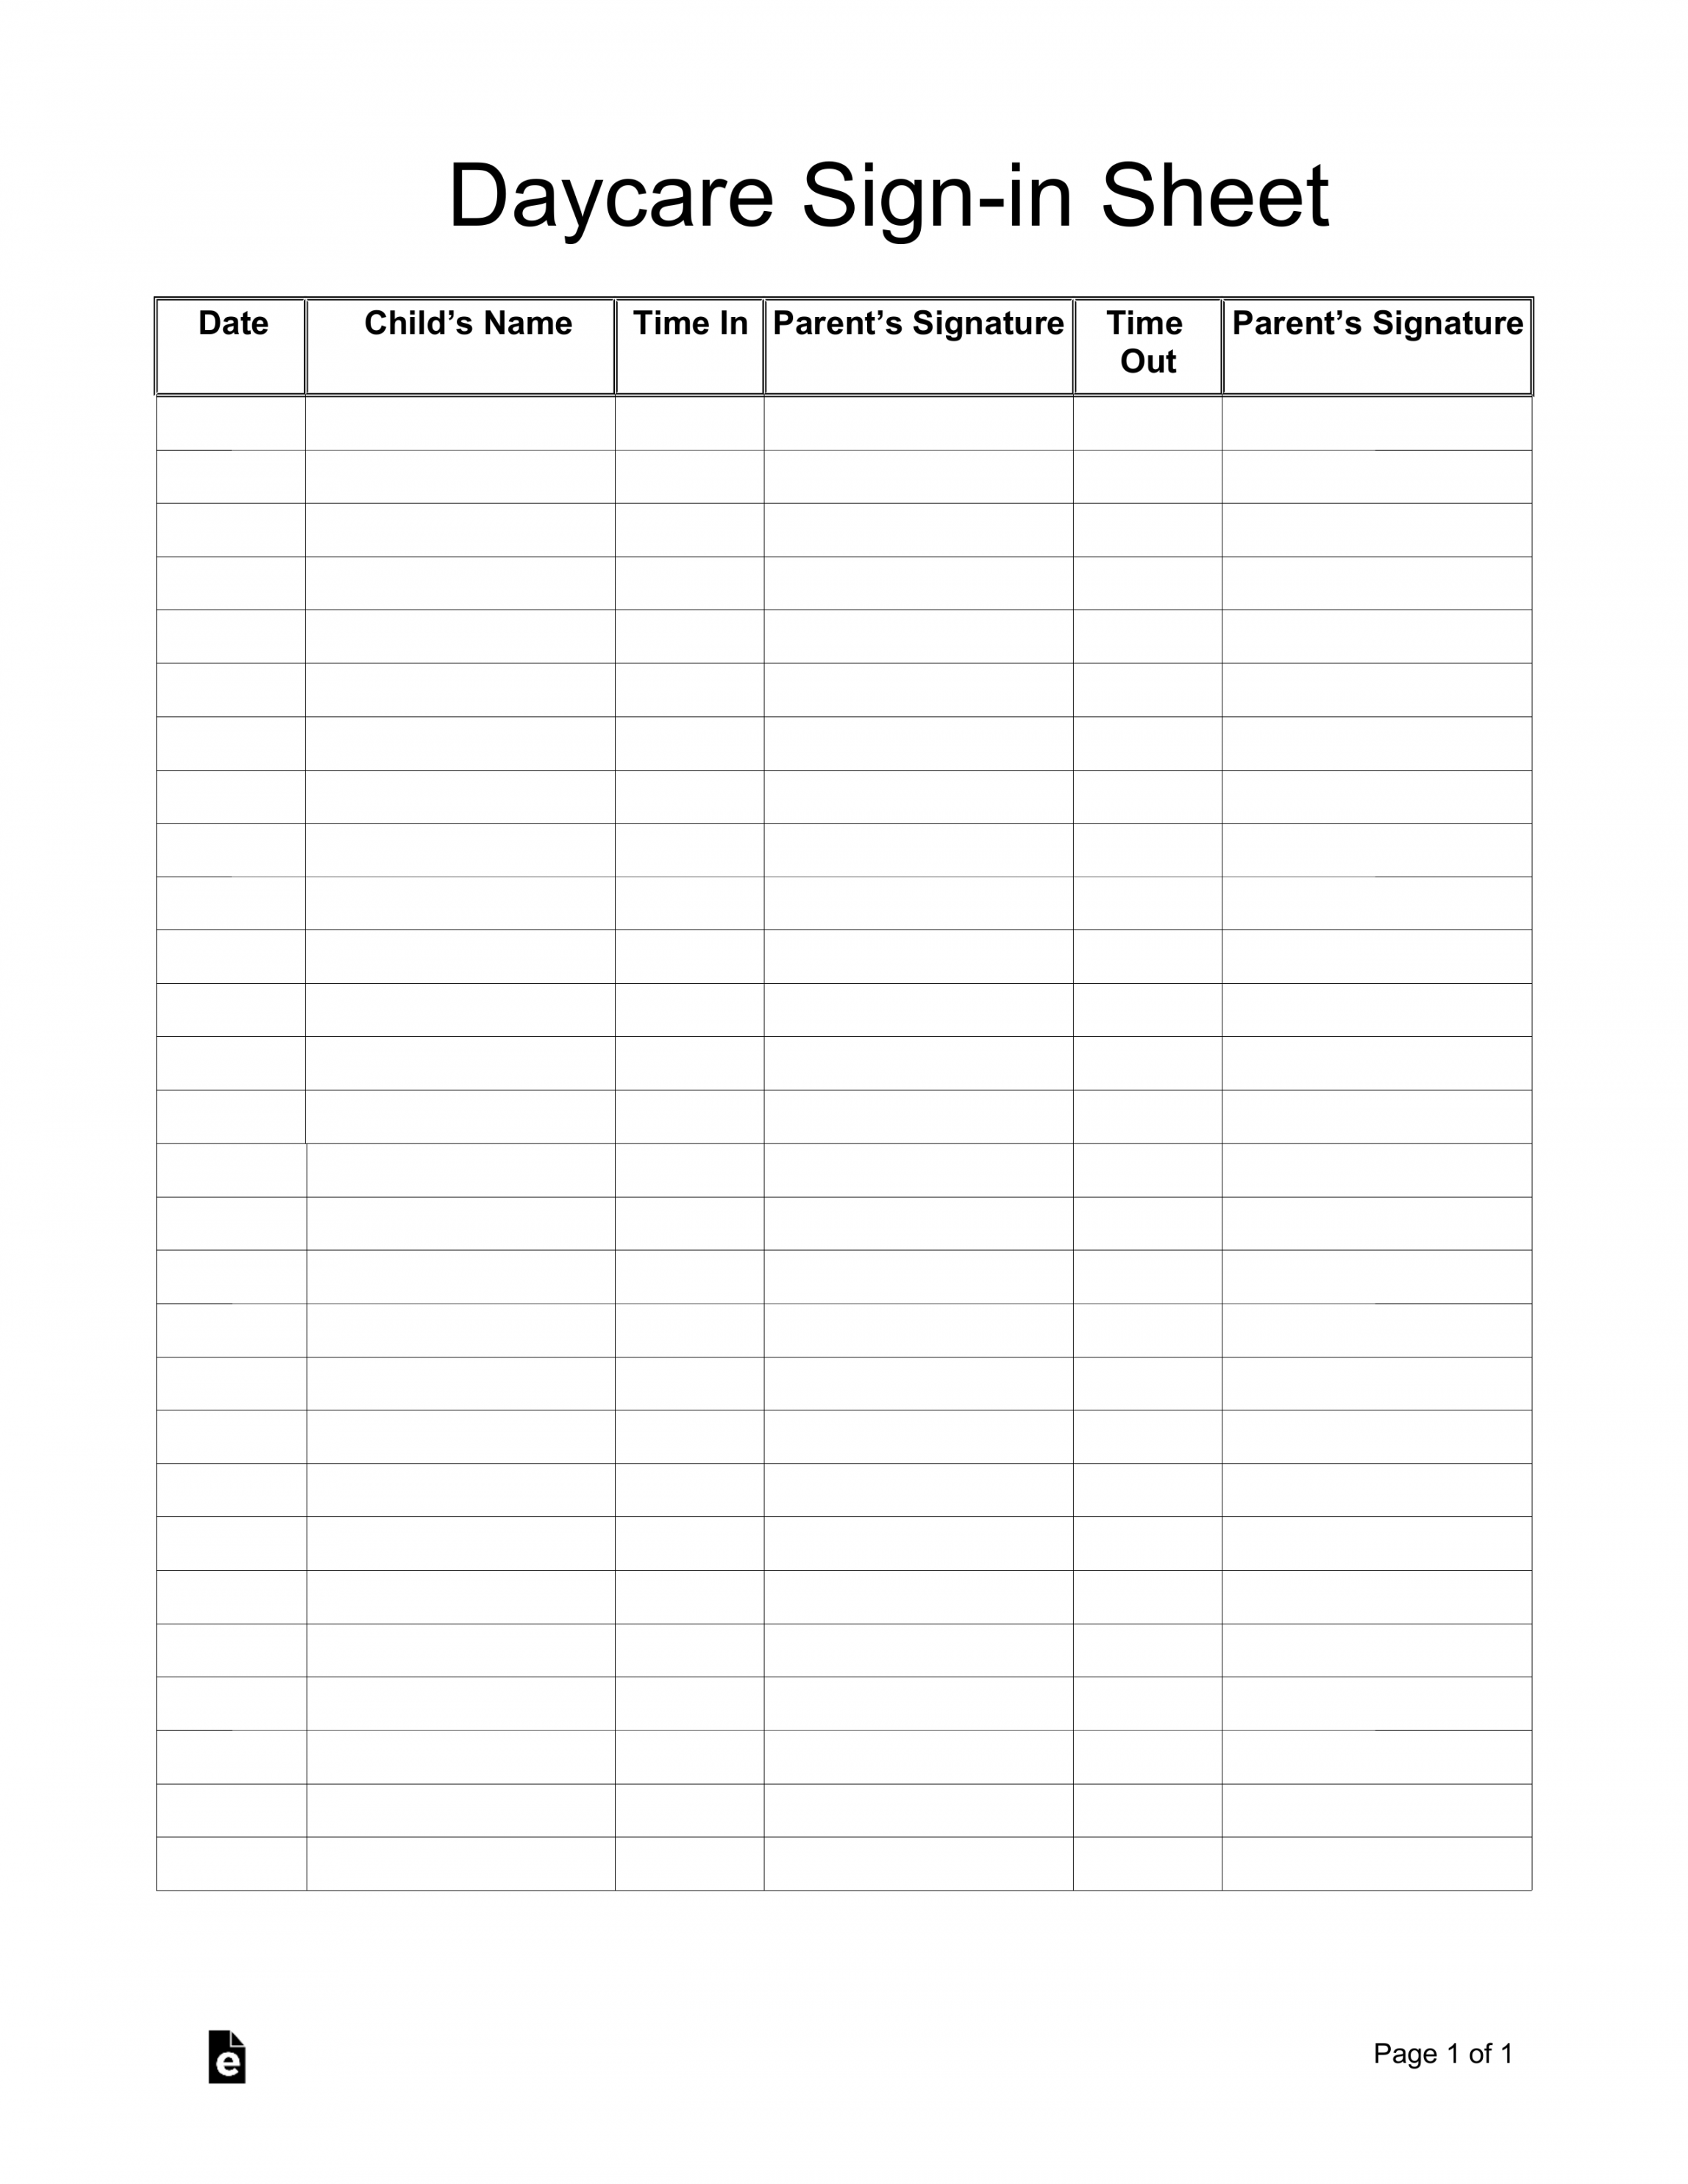 Free Daycare Sign-in Sheet Template - PDF  Word – eForms